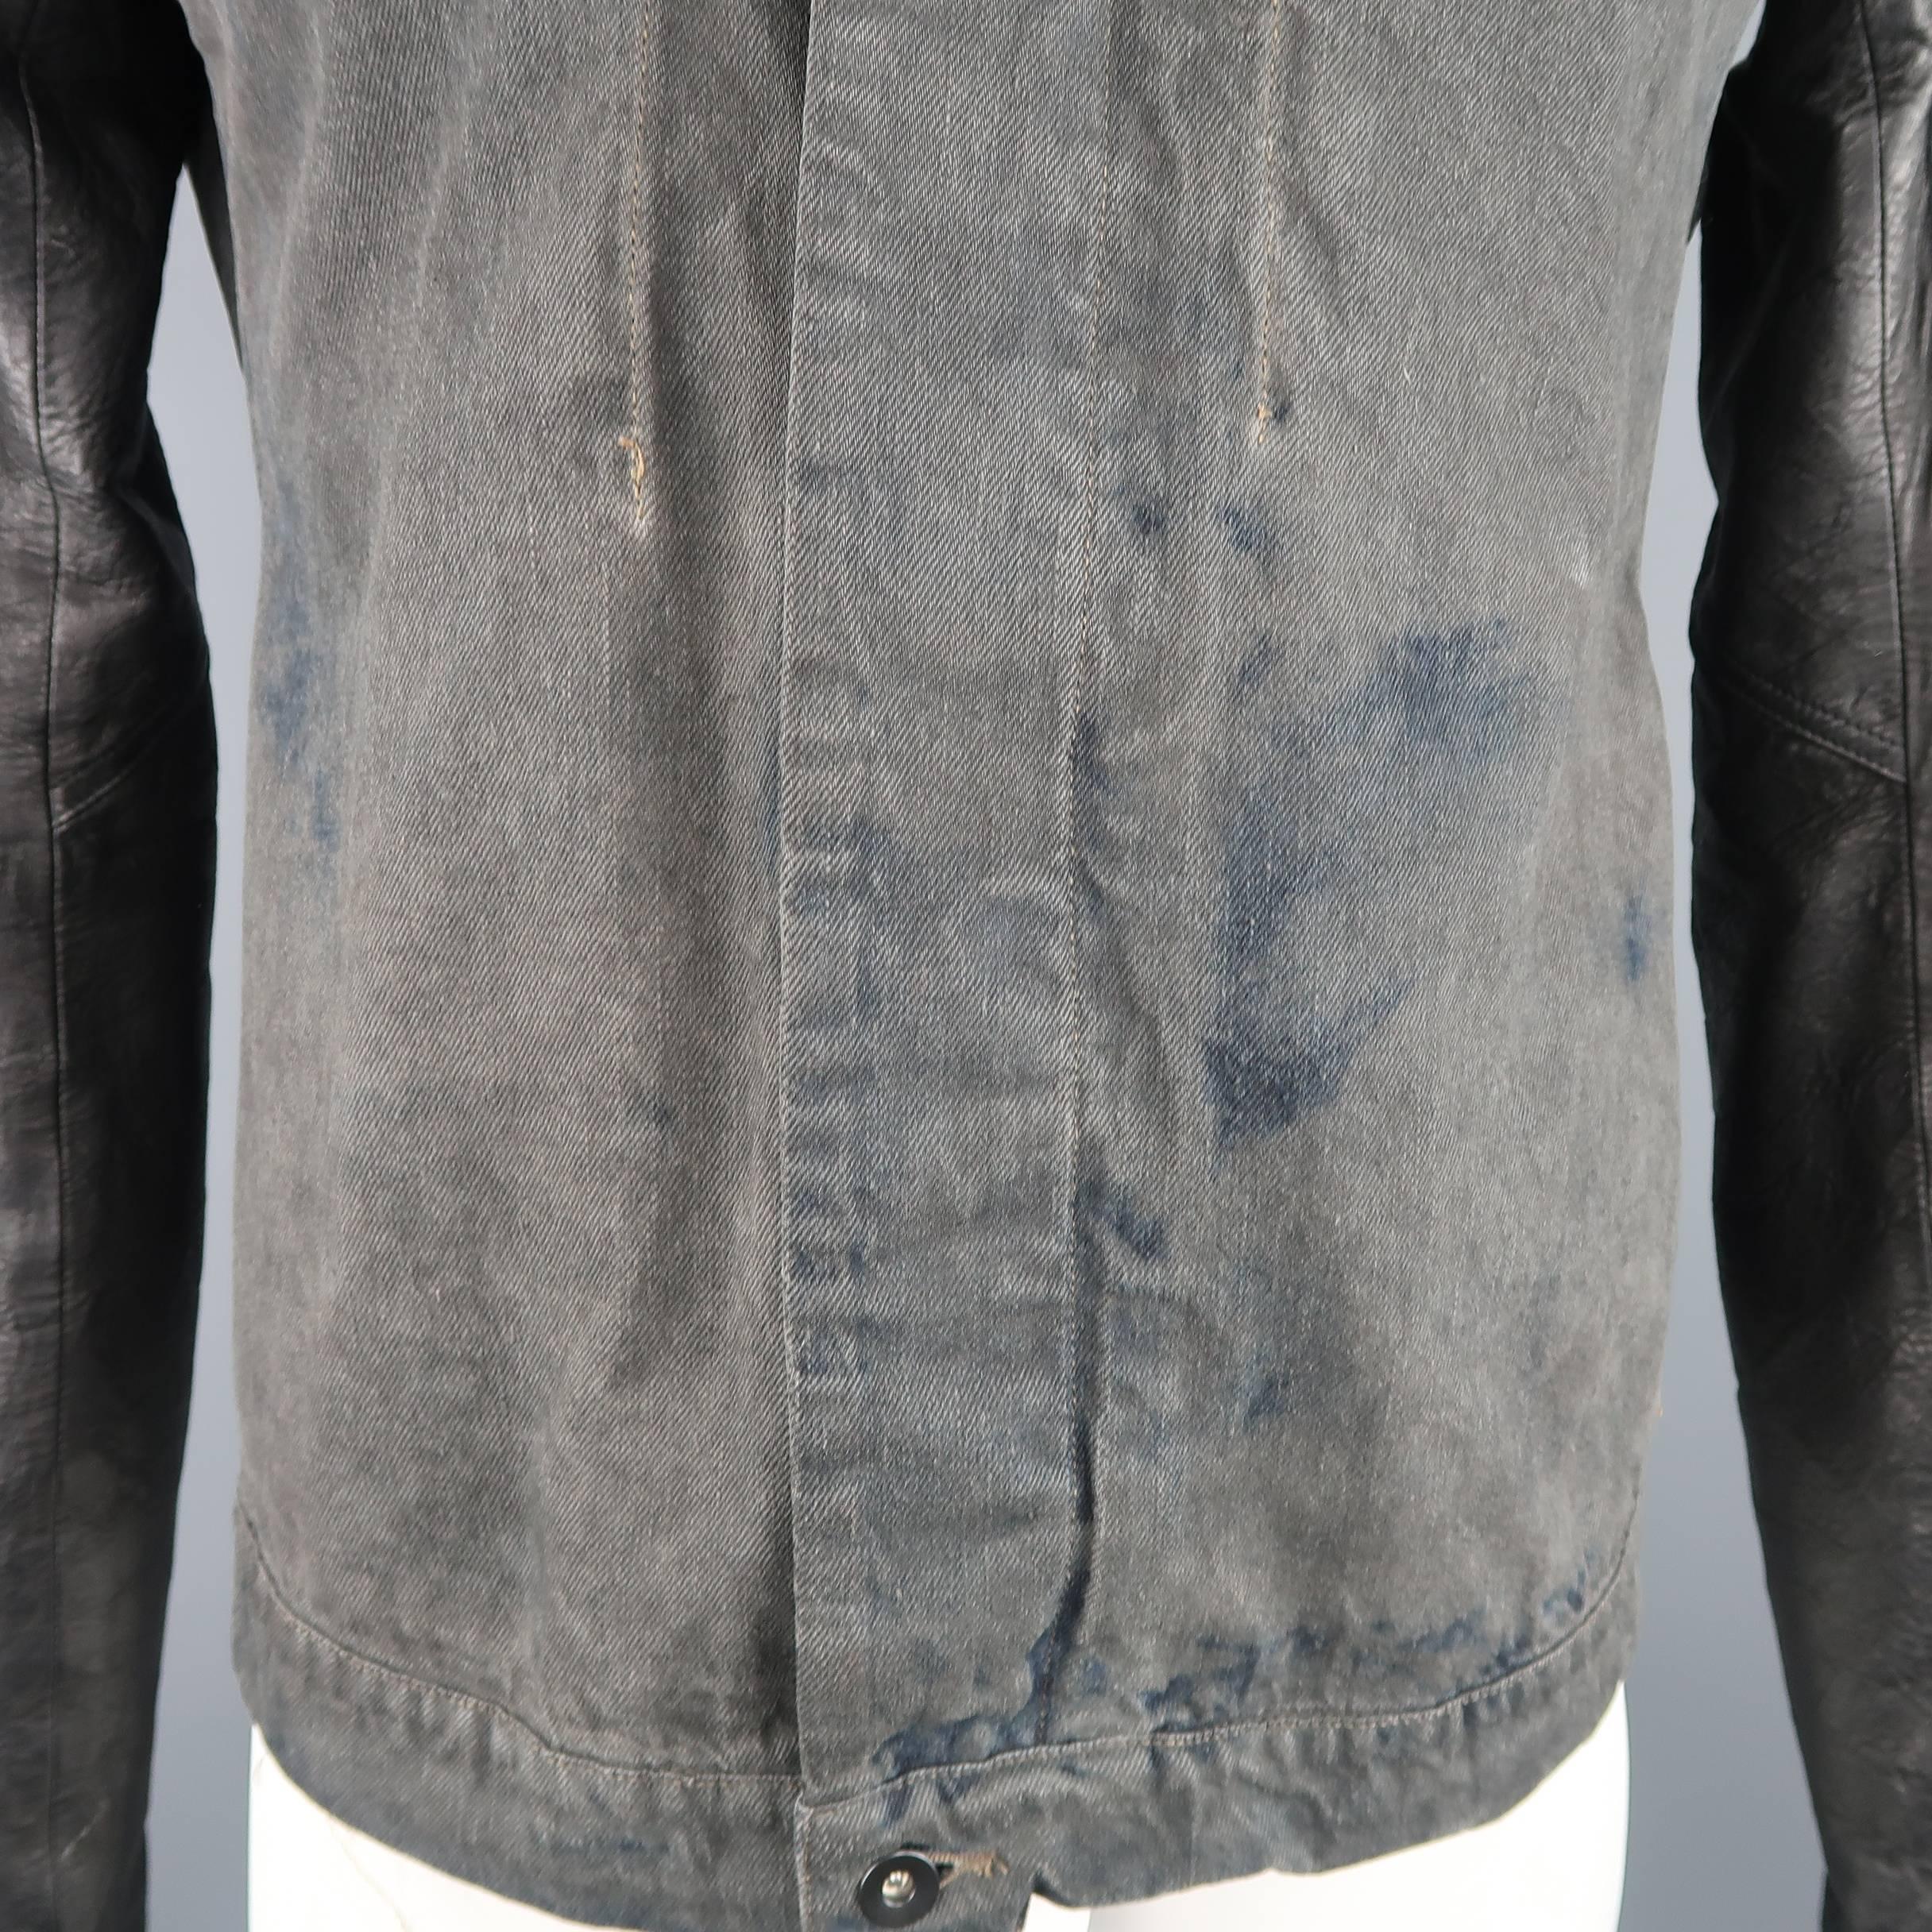 DRKSHDW by RICK OWENS bomber jacket comes in a charcoal gray denim with navy distressed dyed look and features a hidden placket asymmetrical collar and leather zip cuff sleeves with MA-1 pocket. Wear throughout. Made in Italy.
 
Good Pre-Owned